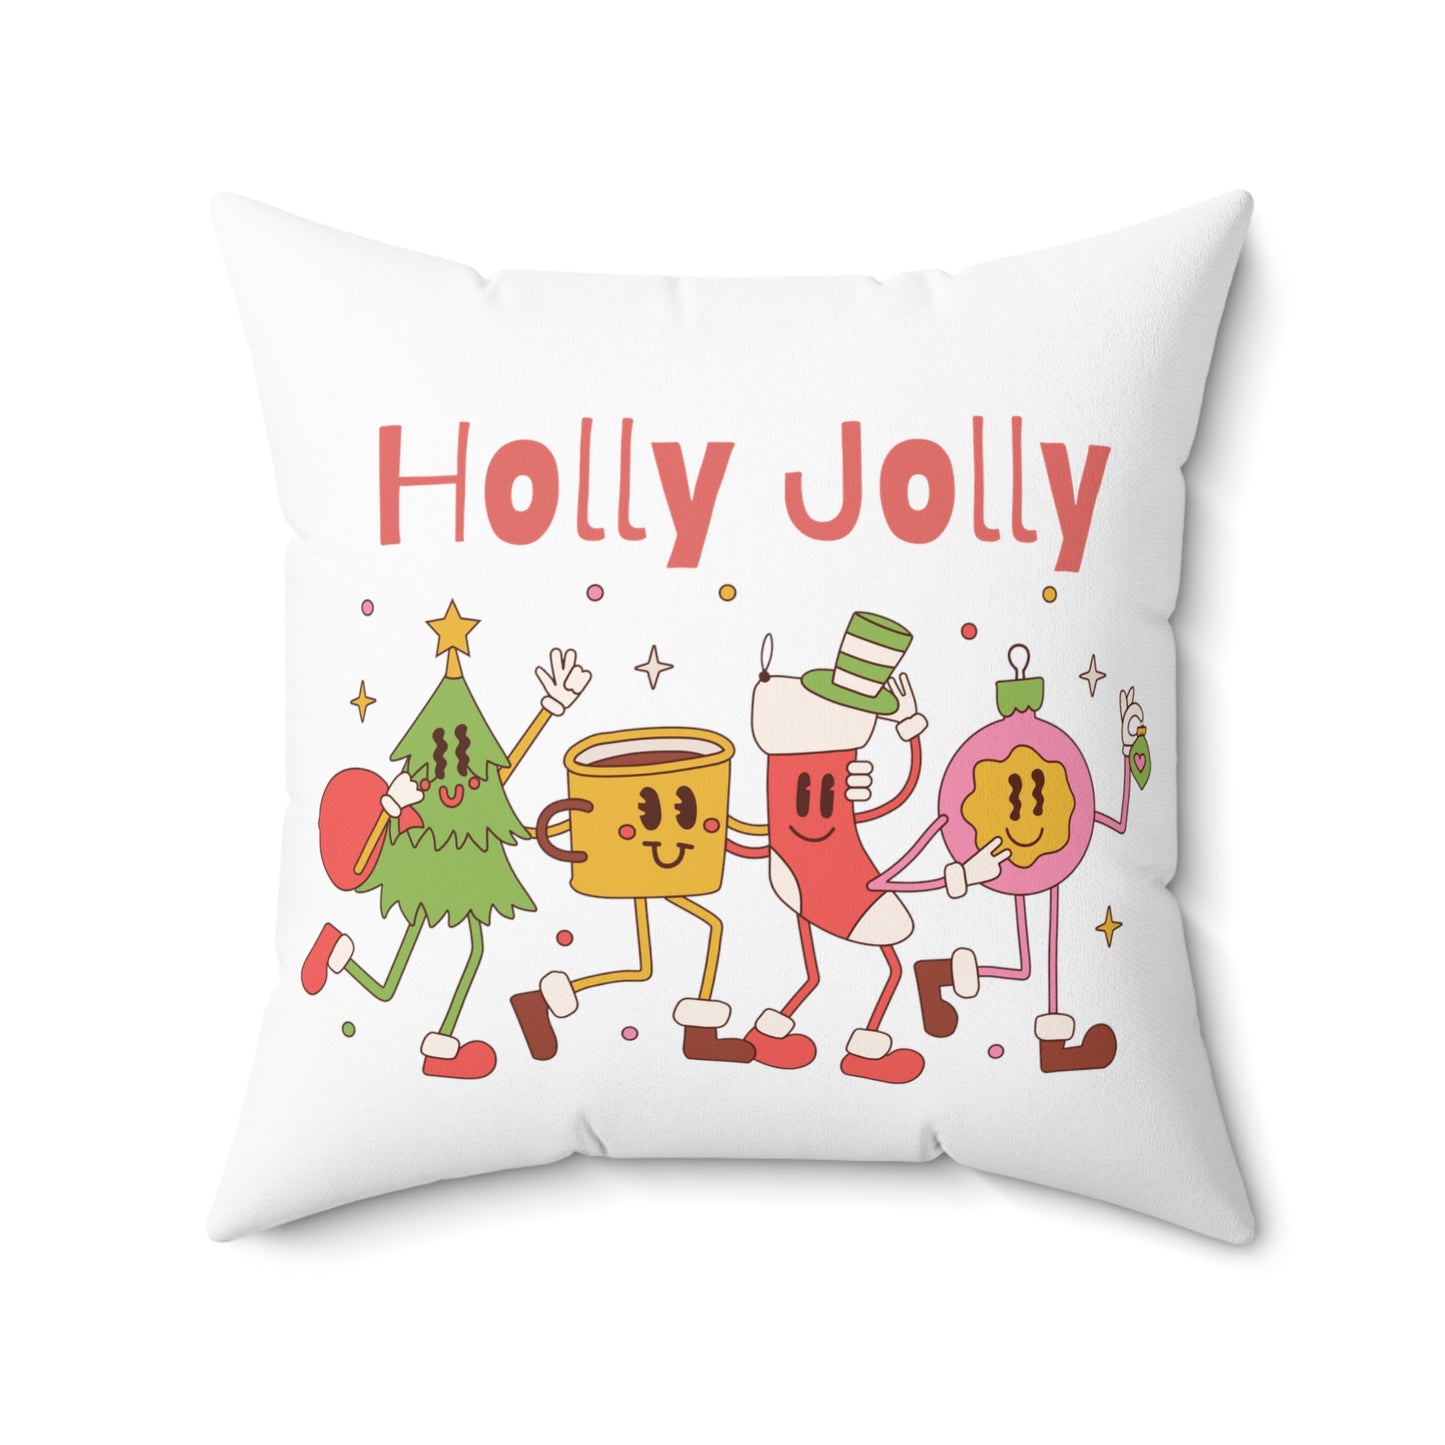 Holly Jolly Printed Polyester Square Pillow